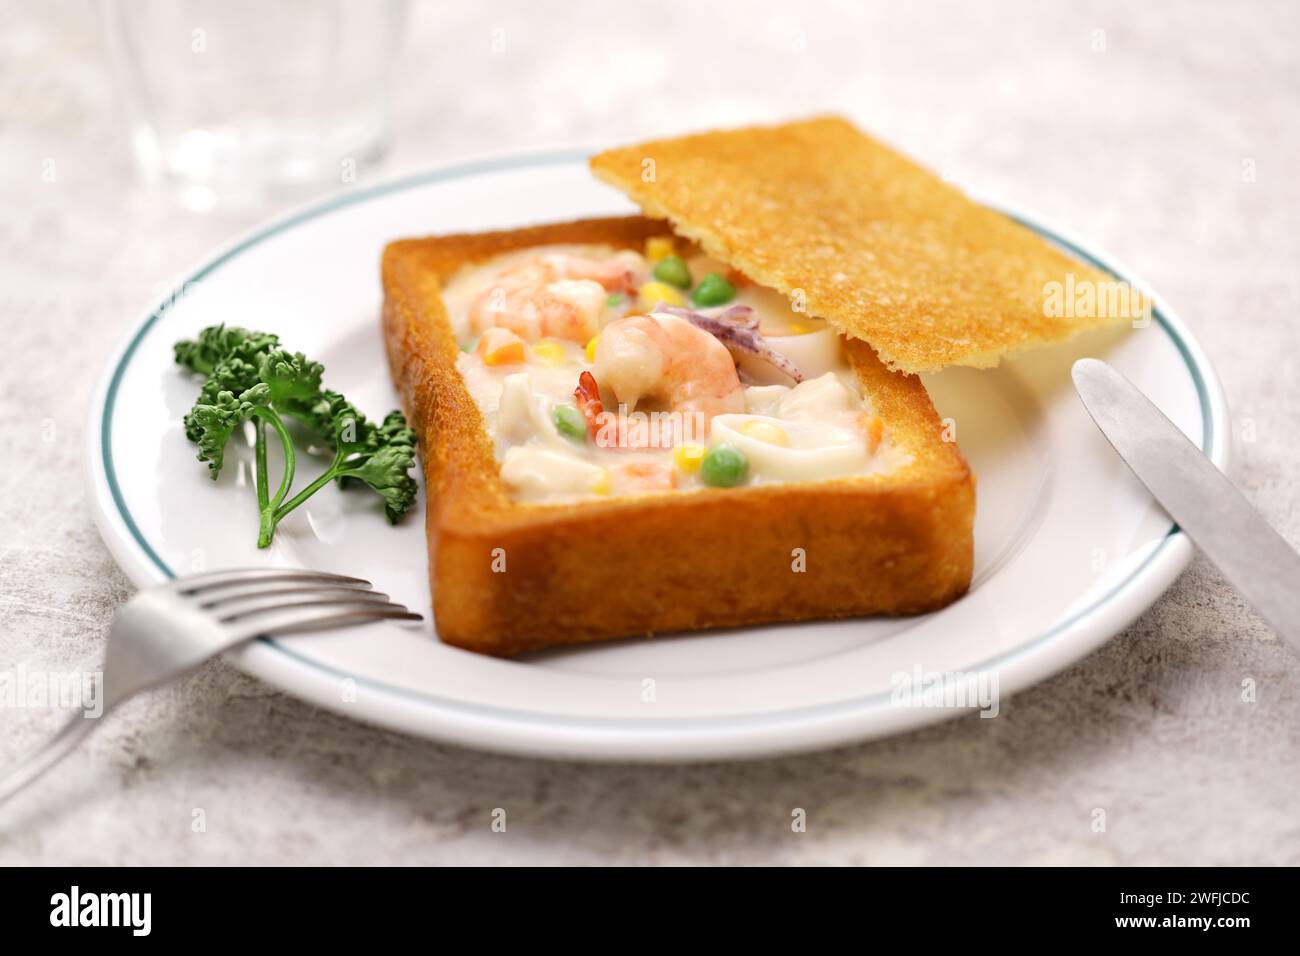 coffin bread, Taiwanese food. It is white bread that has been fried in oil, with the center hollowed out and stuffed with seafood chowder. Stock Photo